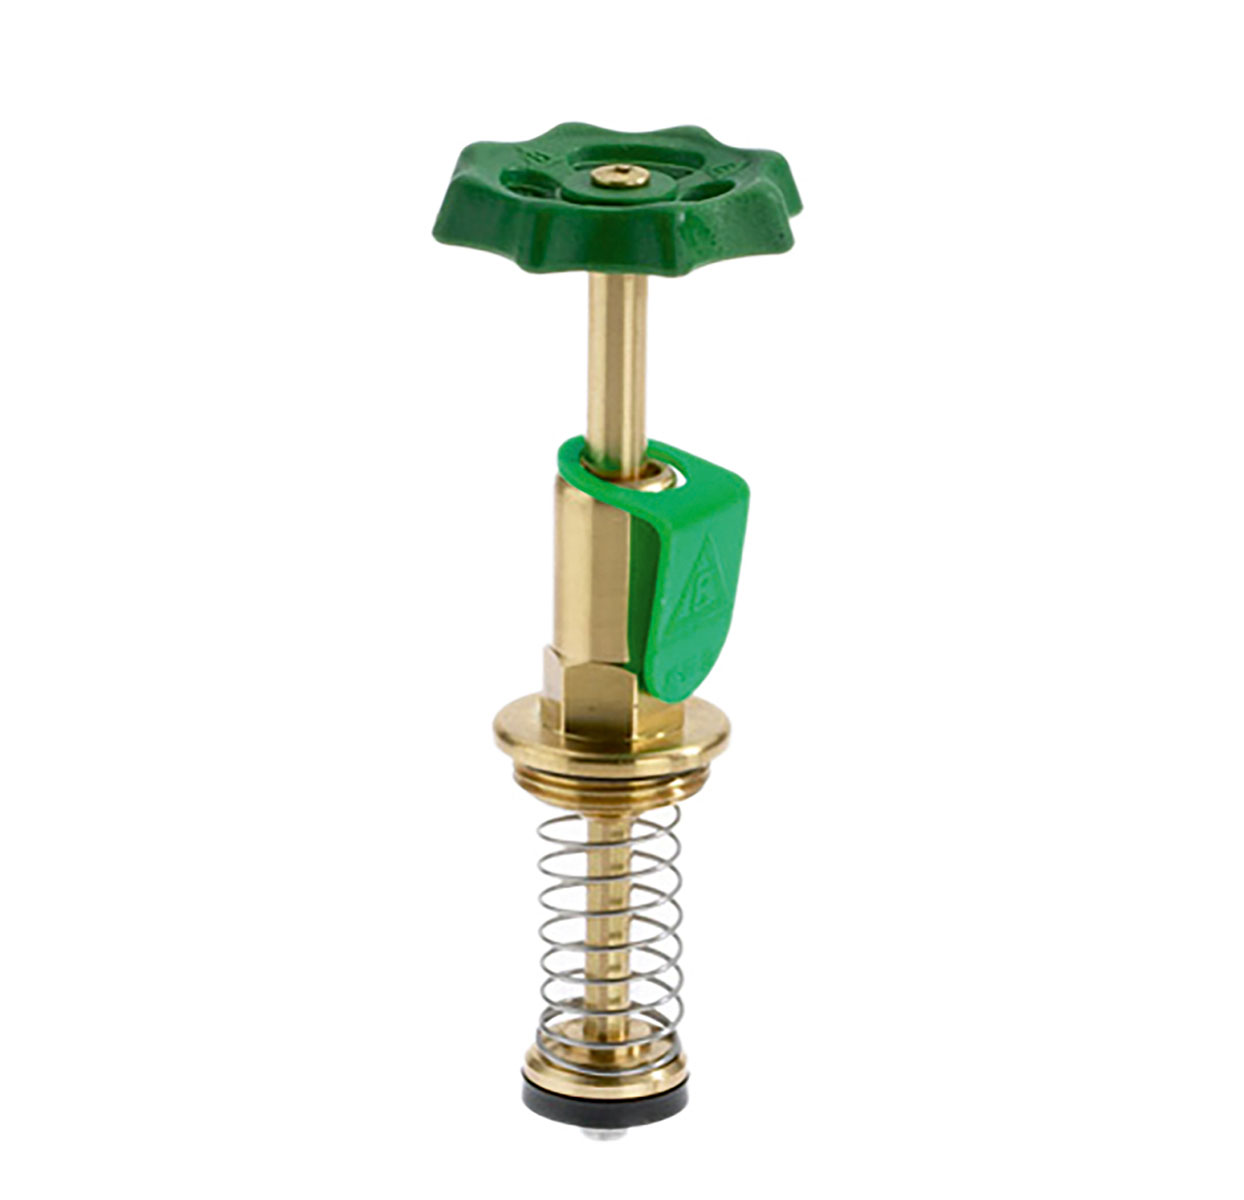 1213150 - Brass Upper-part with grease chamber for Combined Free-flow and Backflow-preventer valves, risinge Spindel